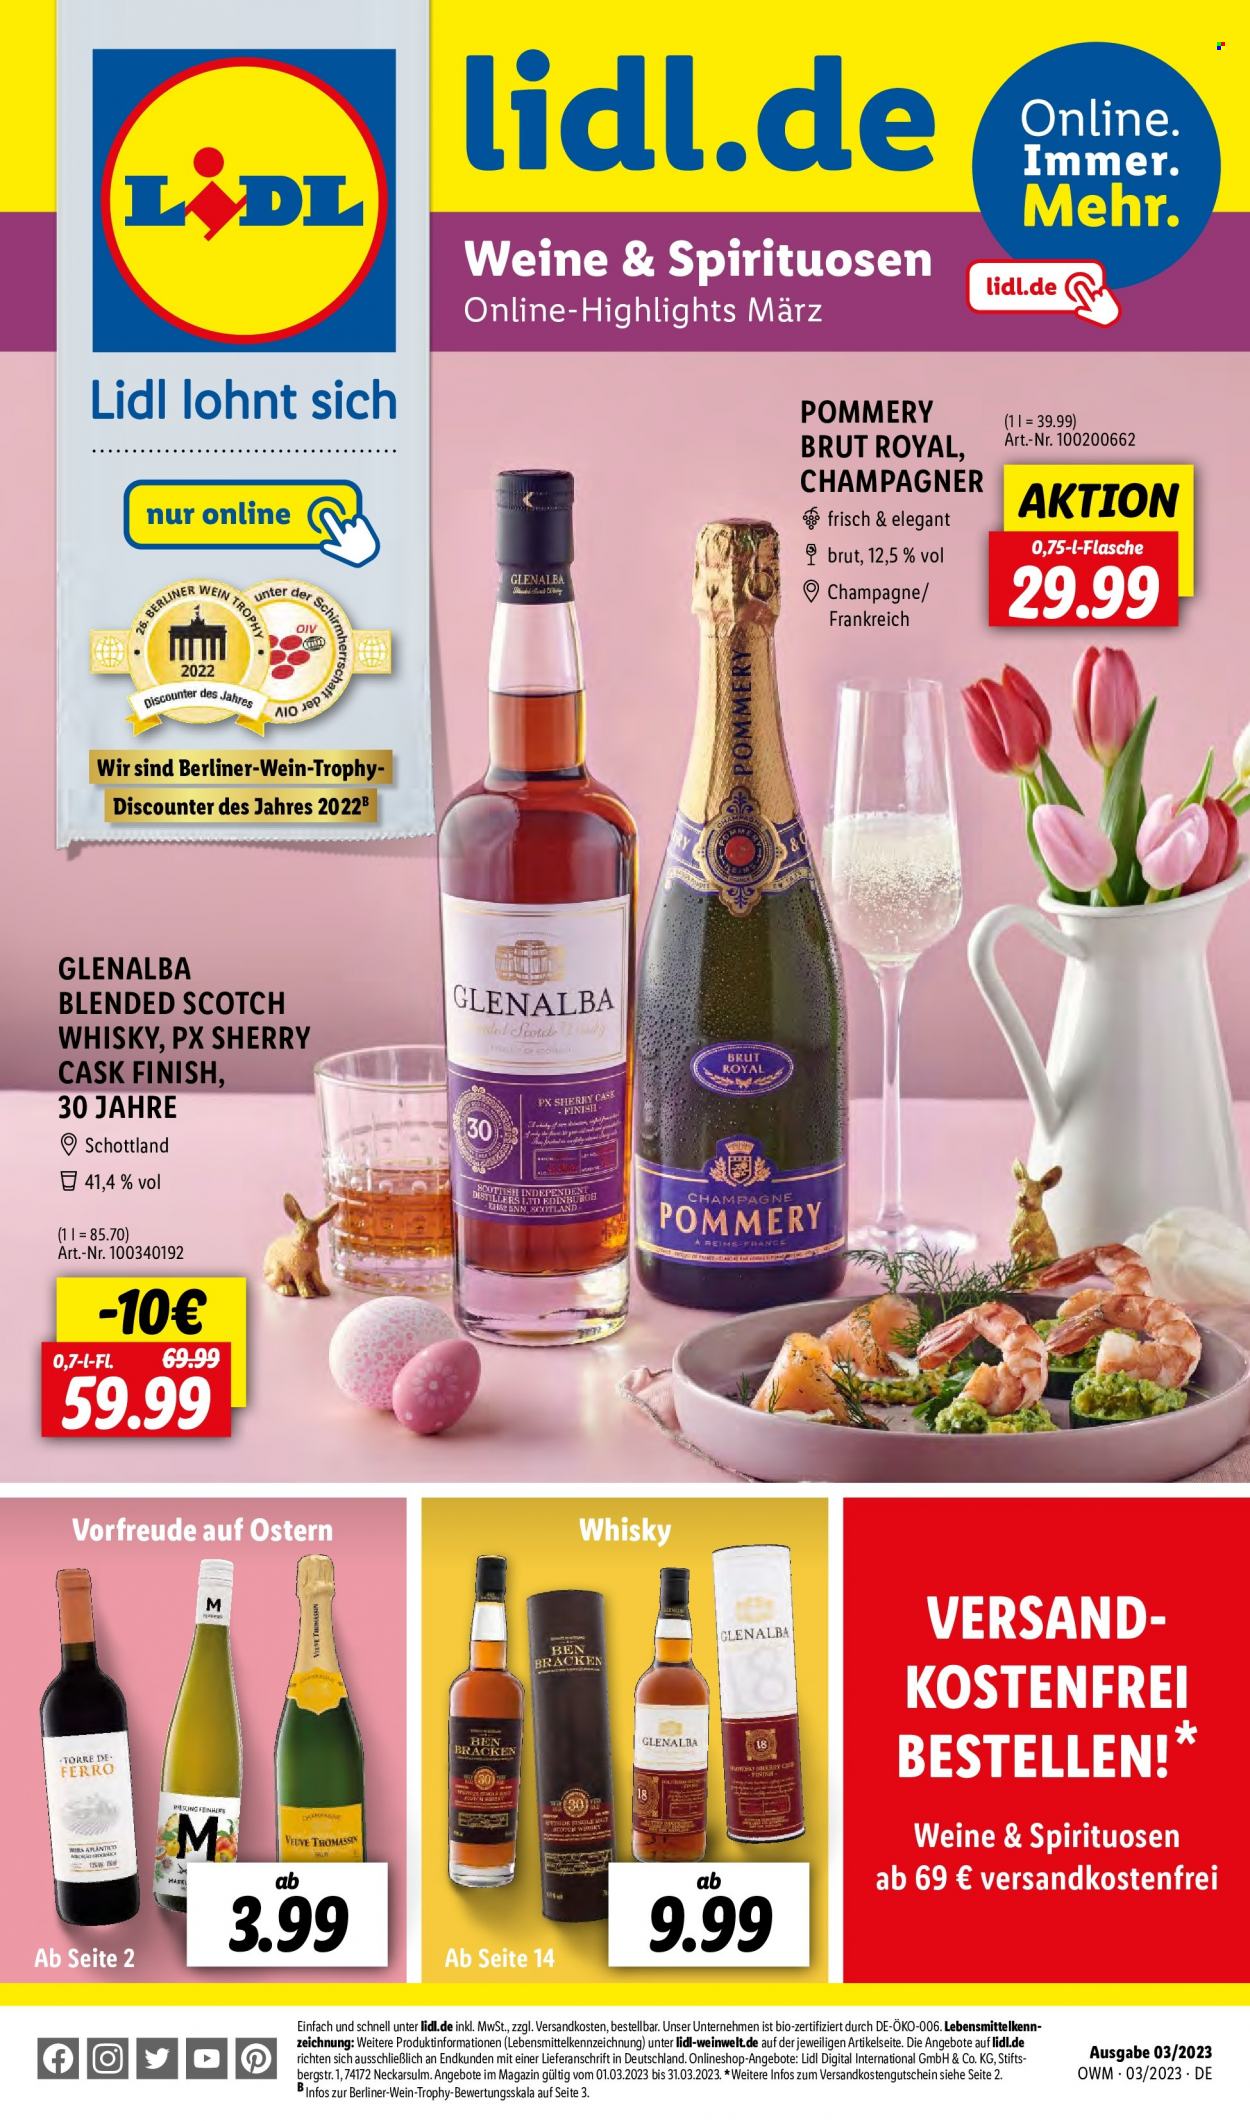 thumbnail - Prospekte Lidl - 1.03.2023 - 31.03.2023 - Produkte in Aktion - Alkohol, Berliner, Wein, Champagne, Schaumwein, Blended Scotch Whisky, Scotch Whisky, Whisky, Sherry, Finish, Schirm. Seite 1.